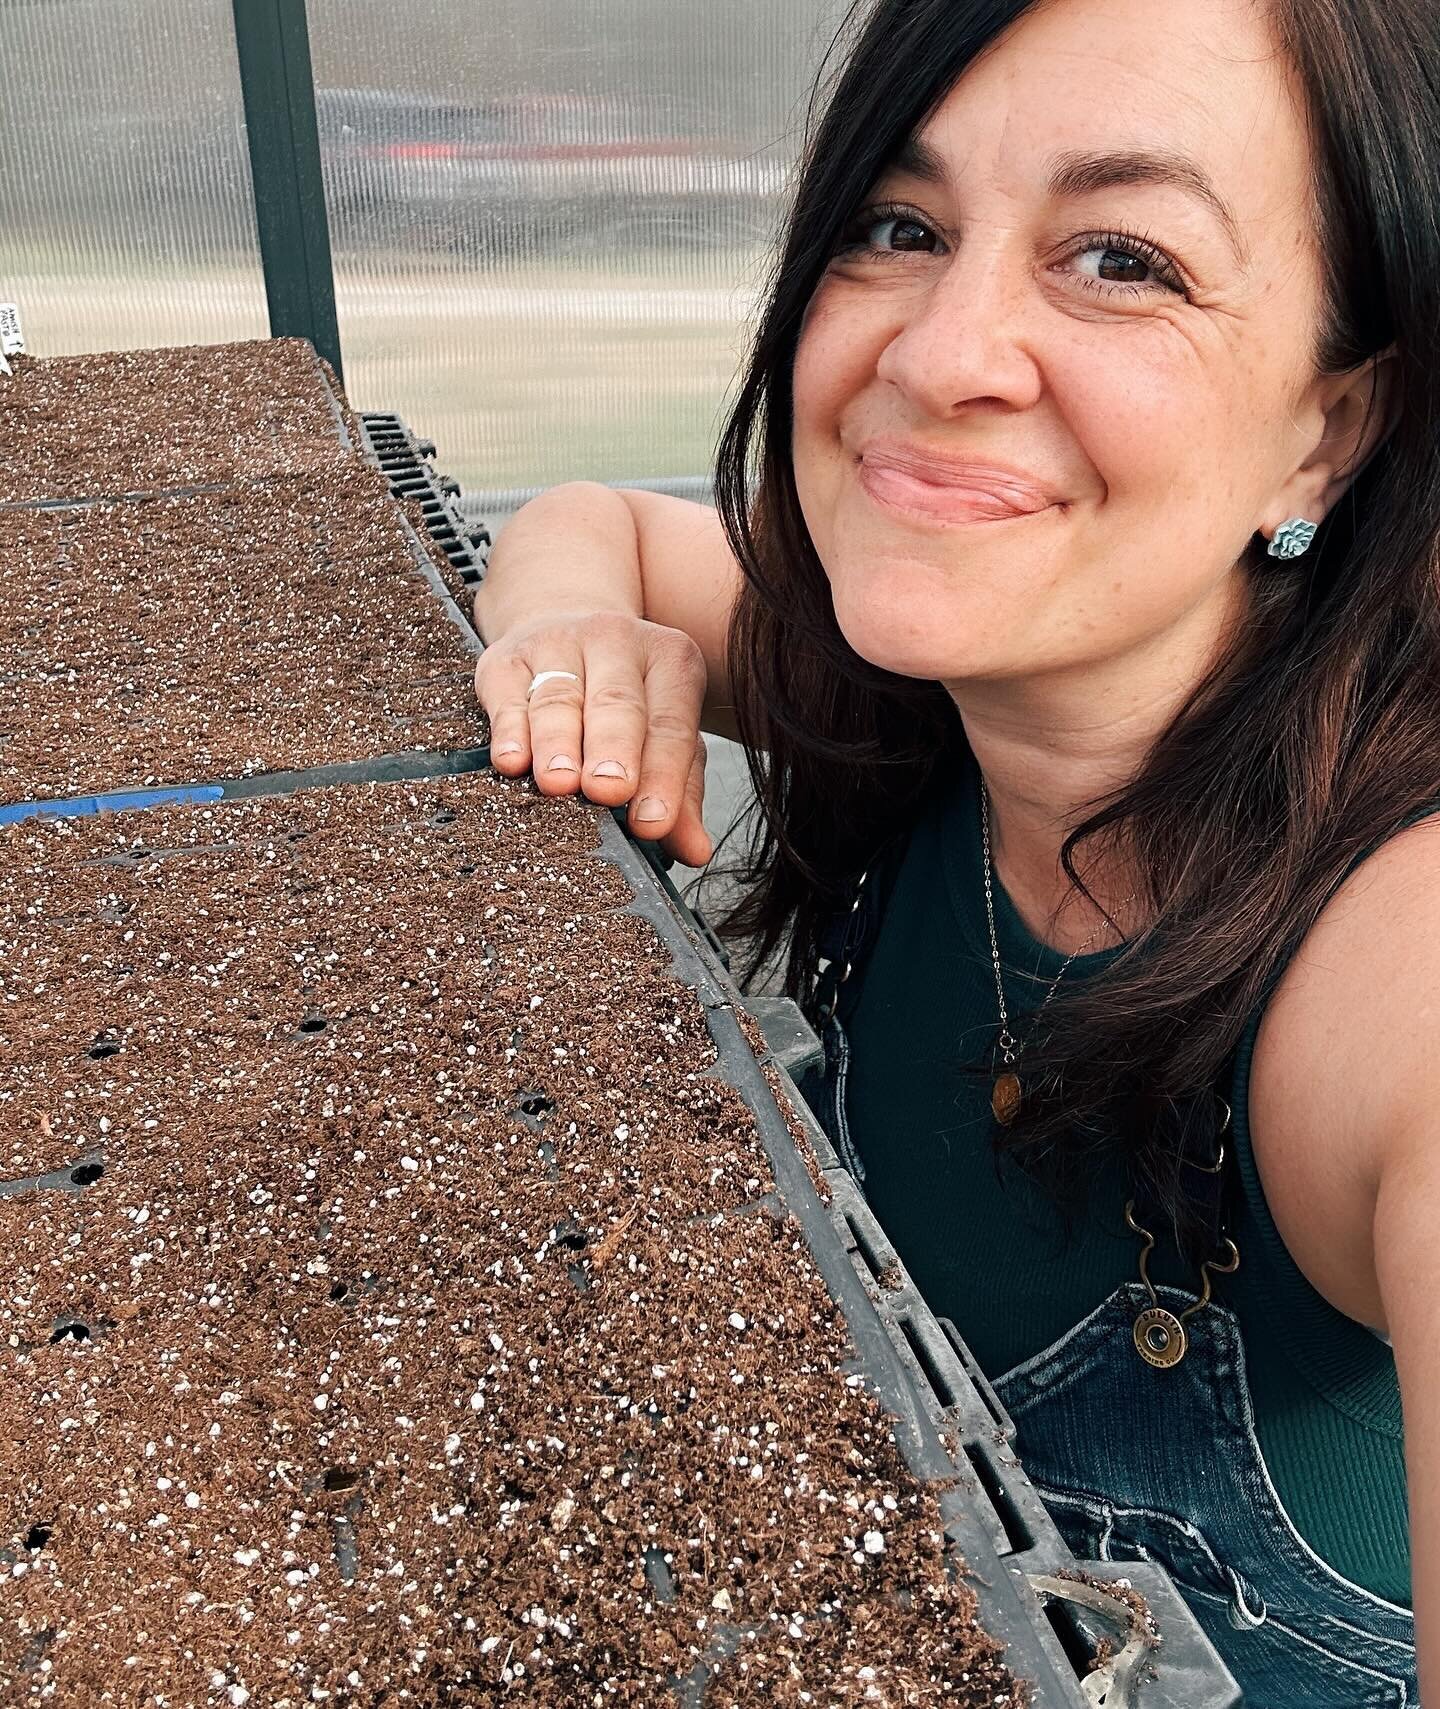 Happy March! Back in my mini greenhouse/she-shed, dirt under fingernails, checking the seedlings multiple times a day, and living by the weather report. Yup, that must mean early spring on @thekindredfarm is approaching! 🌱

Every time we&rsquo;re ab